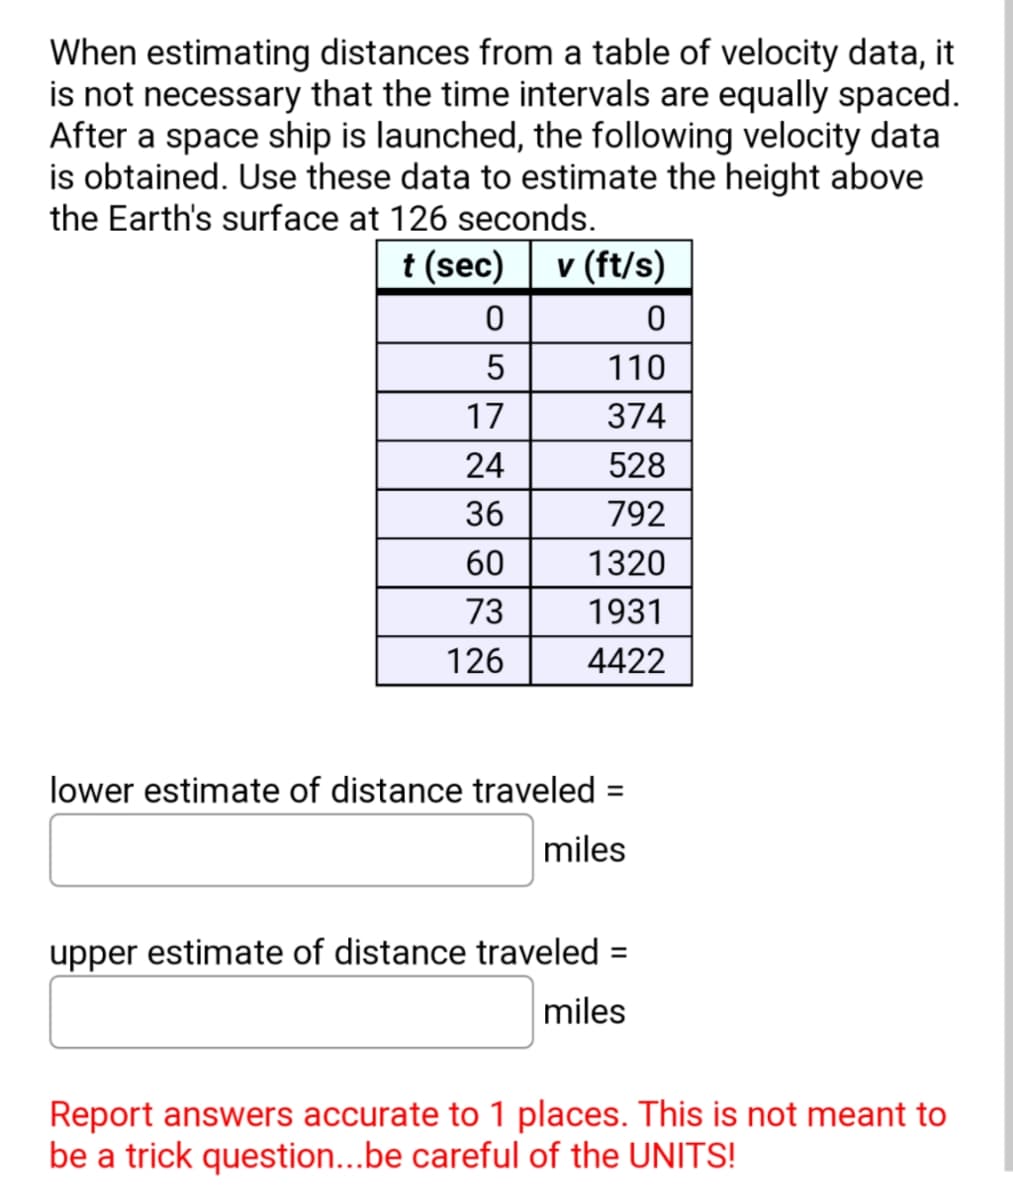 When estimating distances from a table of velocity data, it
is not necessary that the time intervals are equally spaced.
After a space ship is launched, the following velocity data
is obtained. Use these data to estimate the height above
the Earth's surface at 126 seconds.
t (sec) v (ft/s)
0
5
17
24
36
60
73
126
0
110
374
528
792
1320
1931
4422
lower estimate of distance traveled
miles
=
upper estimate of distance traveled =
miles
Report answers accurate to 1 places. This is not meant to
be a trick question...be careful of the UNITS!